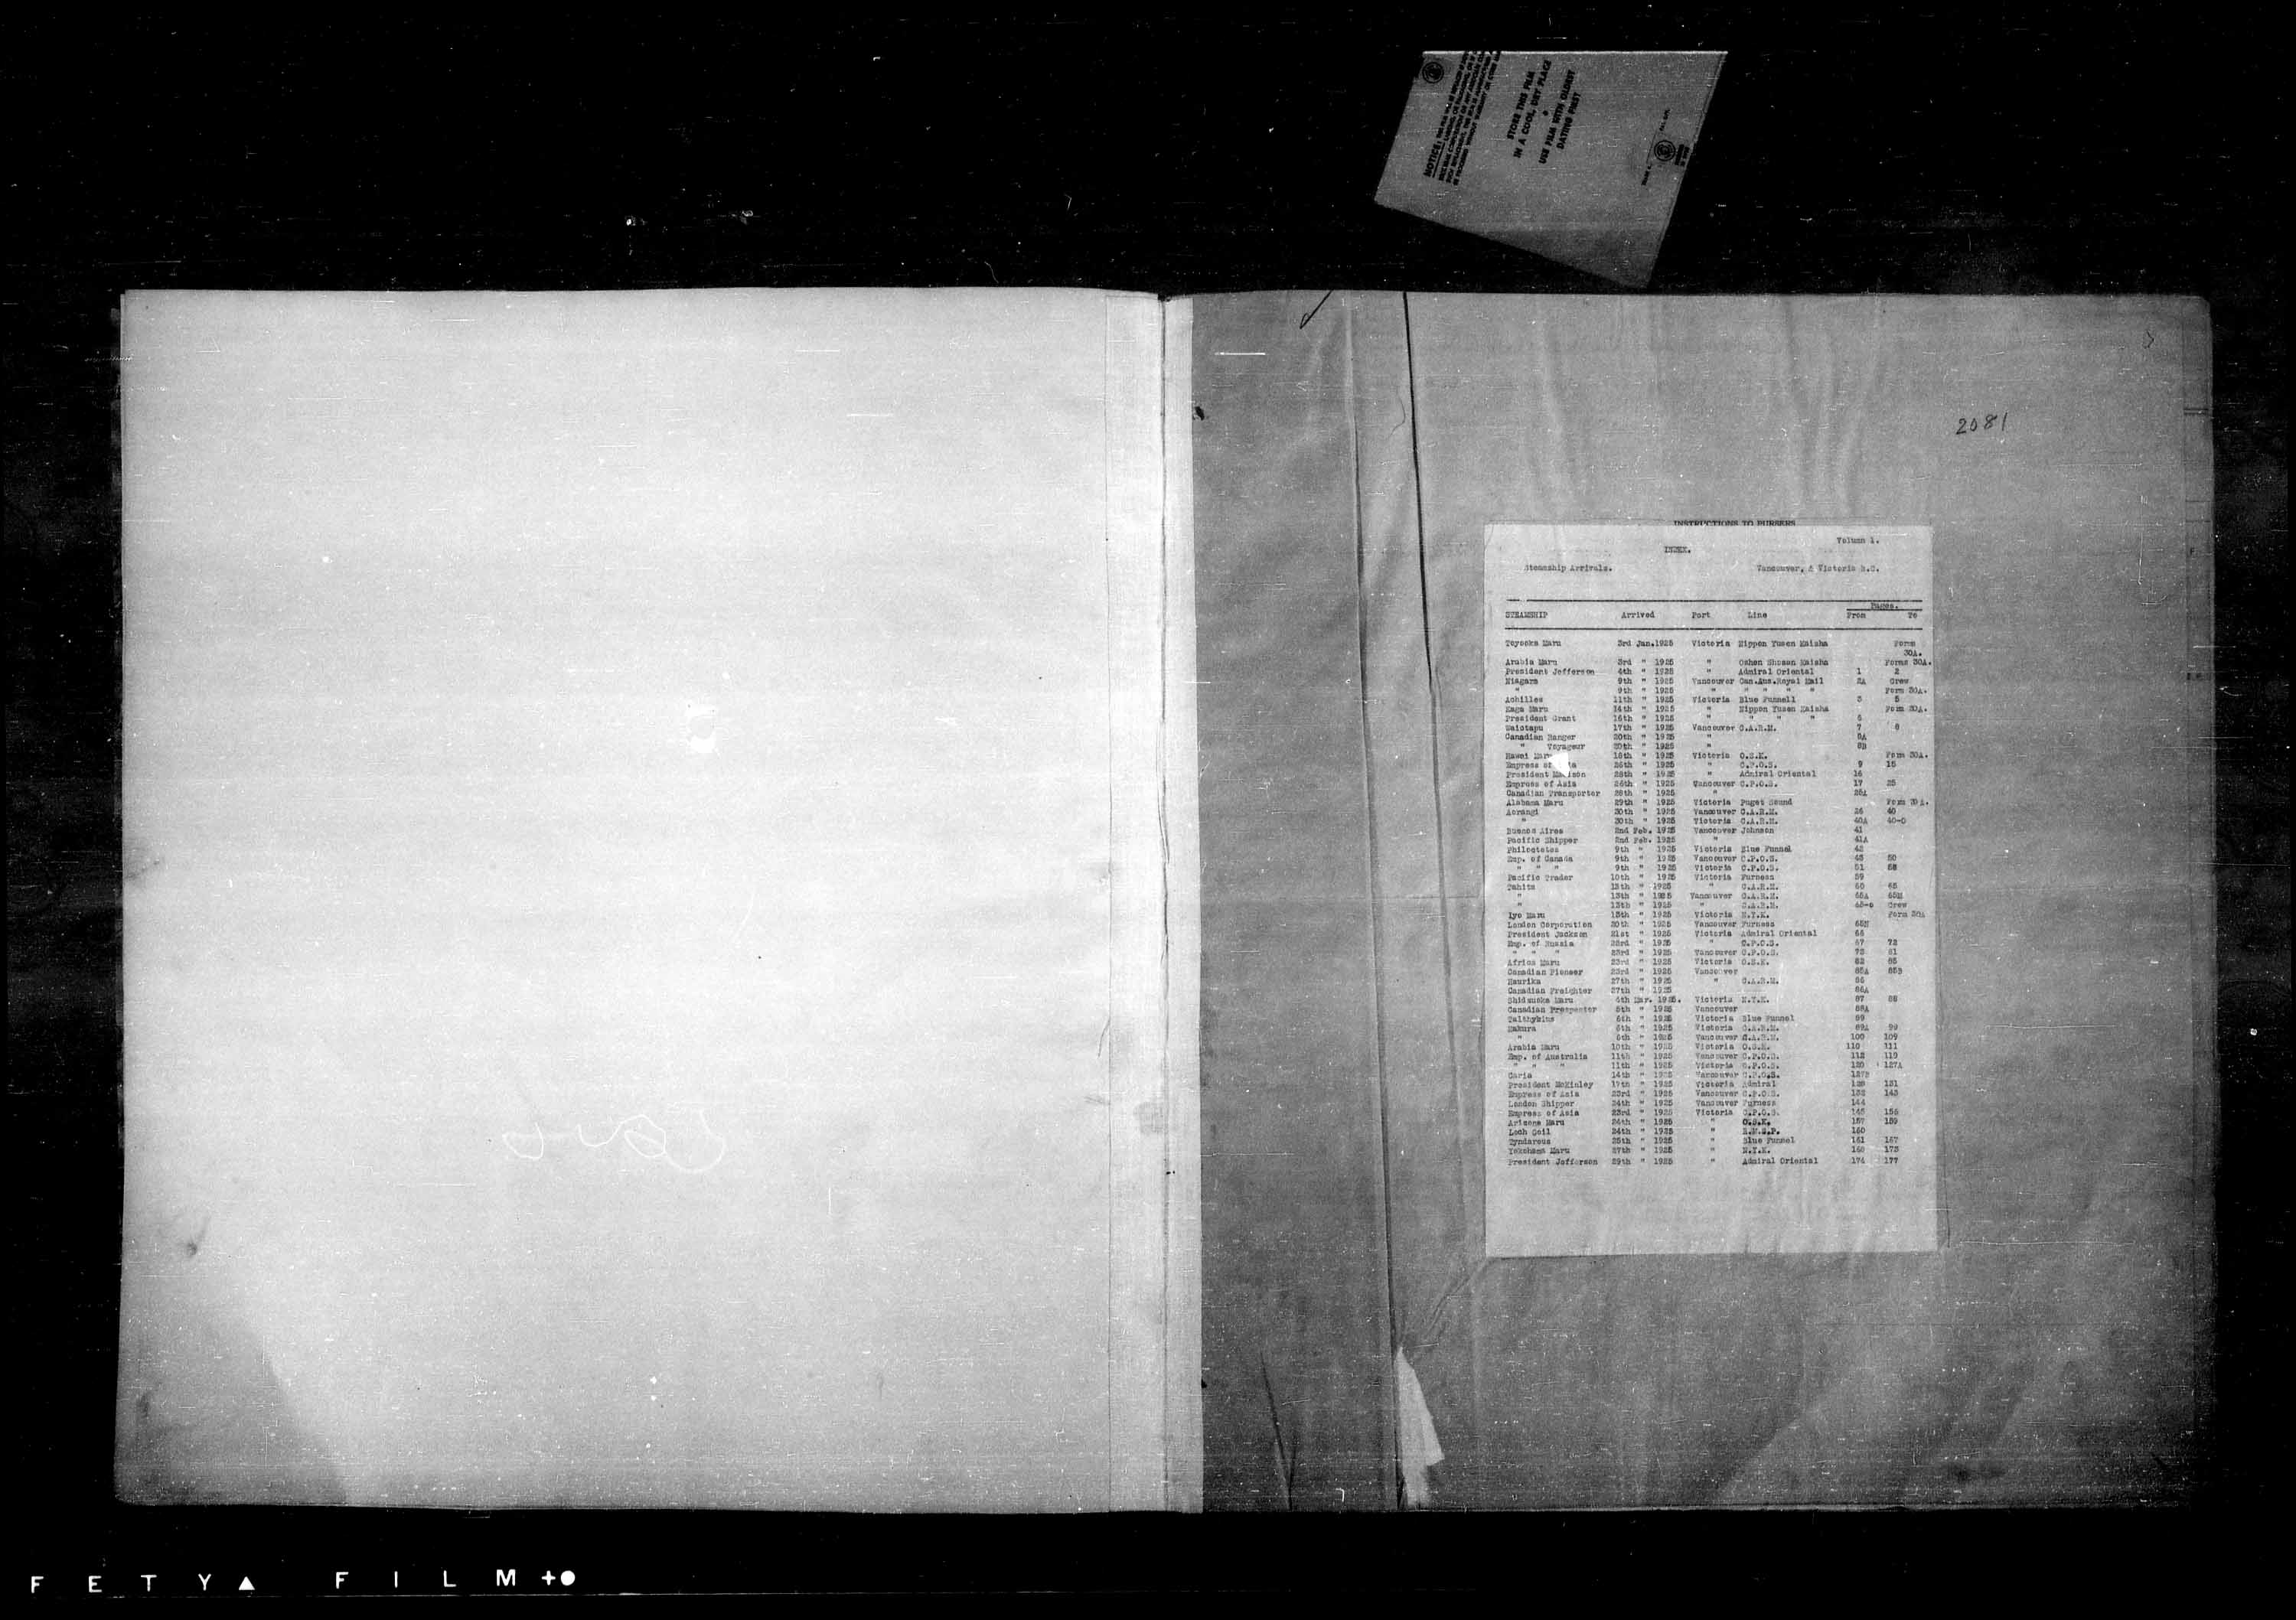 Title: Passenger Lists: Vancouver and Victoria (1925-1935) - Mikan Number: 161347 - Microform: t-14881